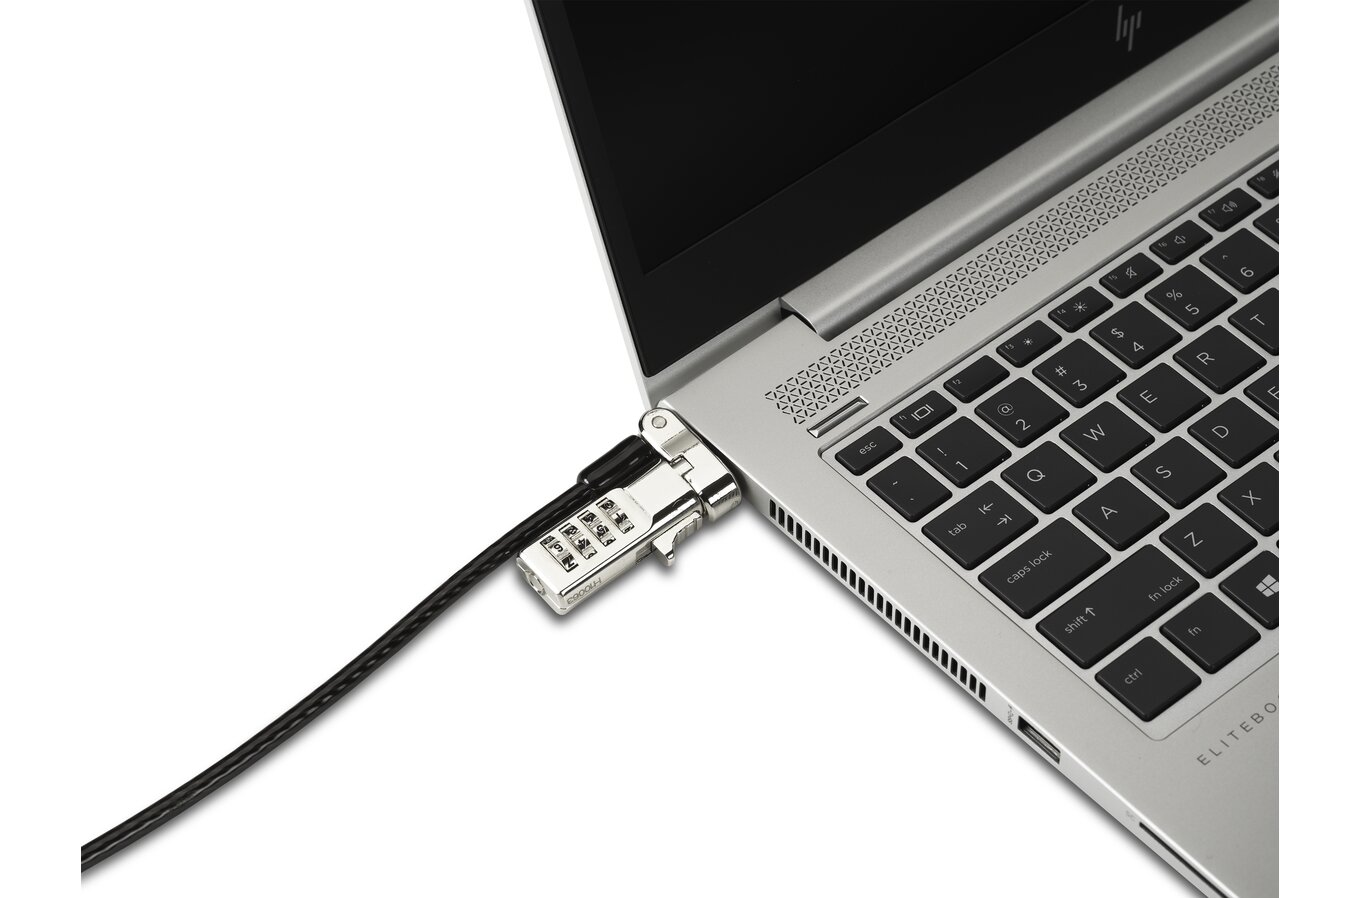 Navilock Products 20676 Navilock Laptop Security Cable with 3